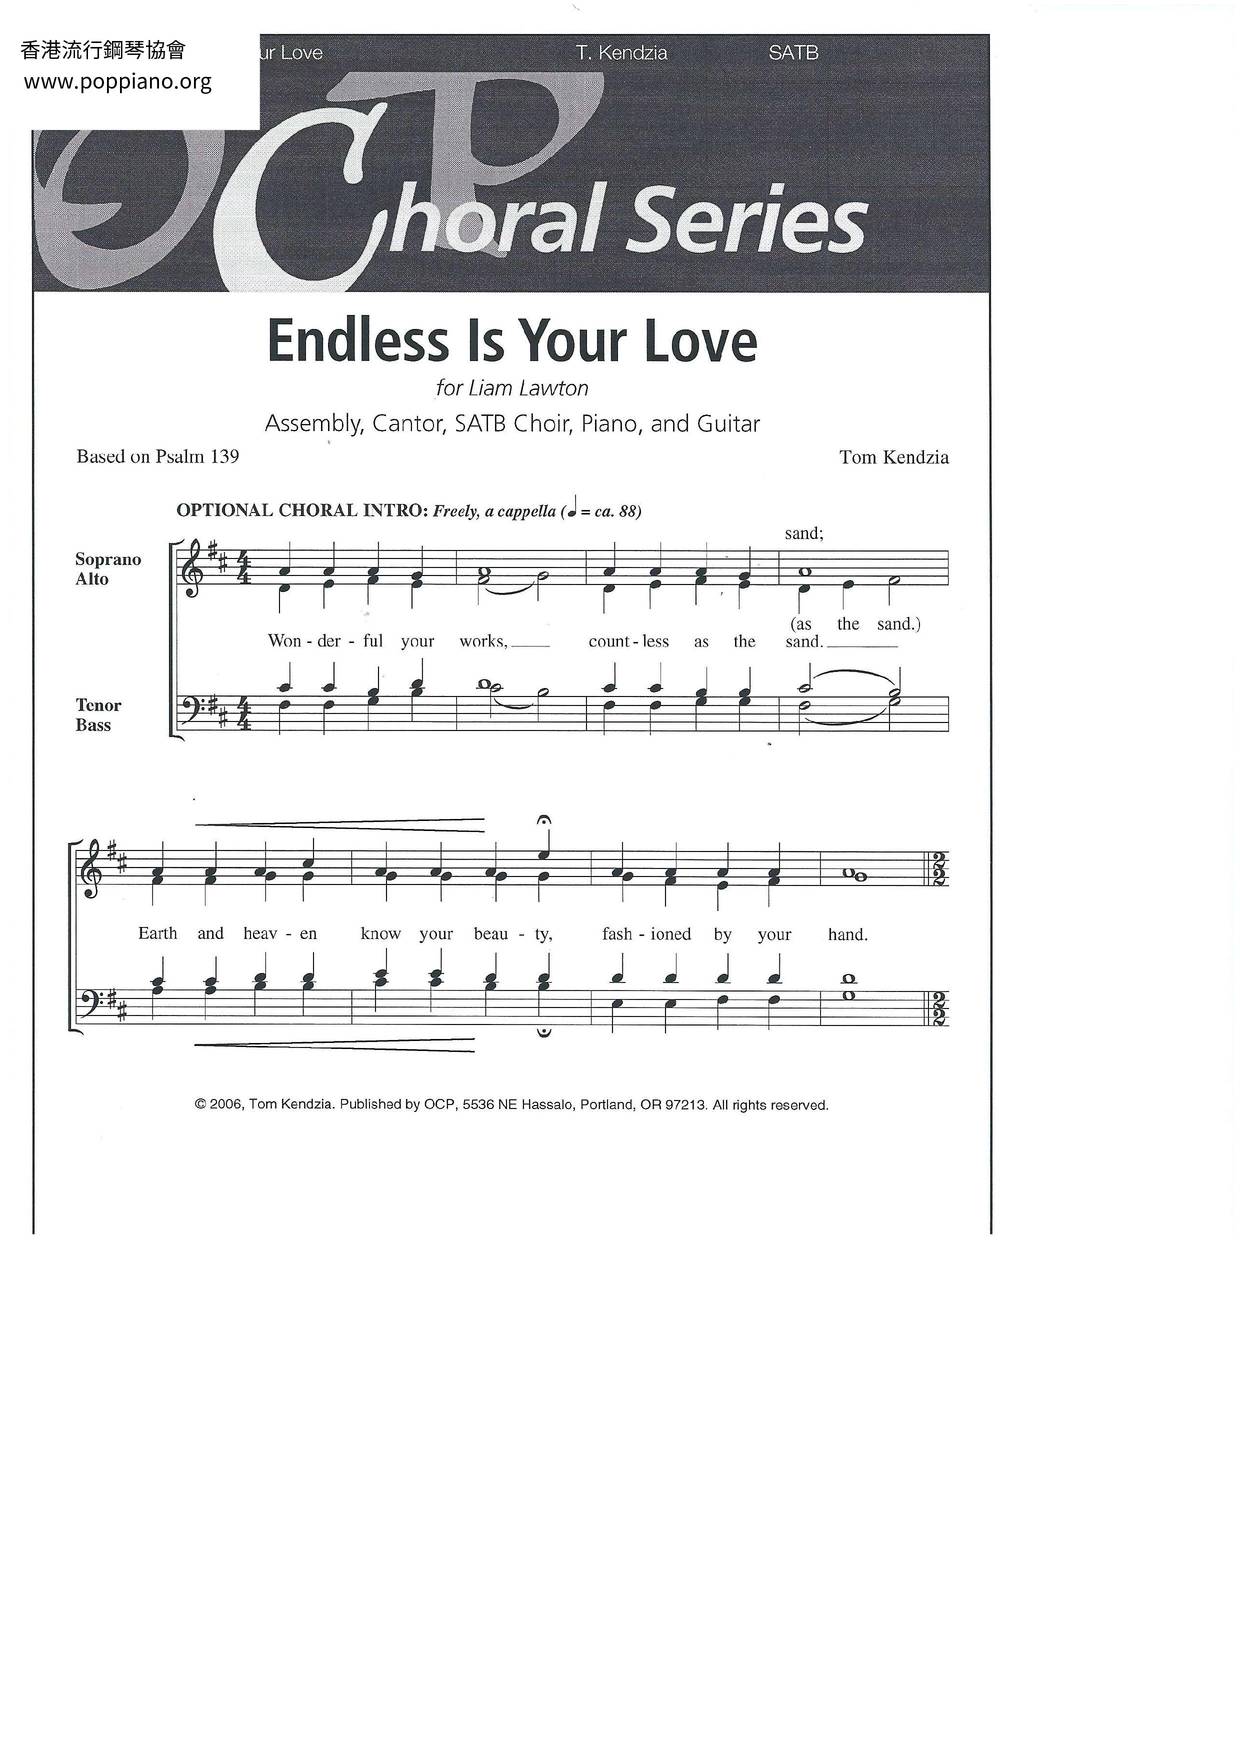 Endless Is Your Love Score